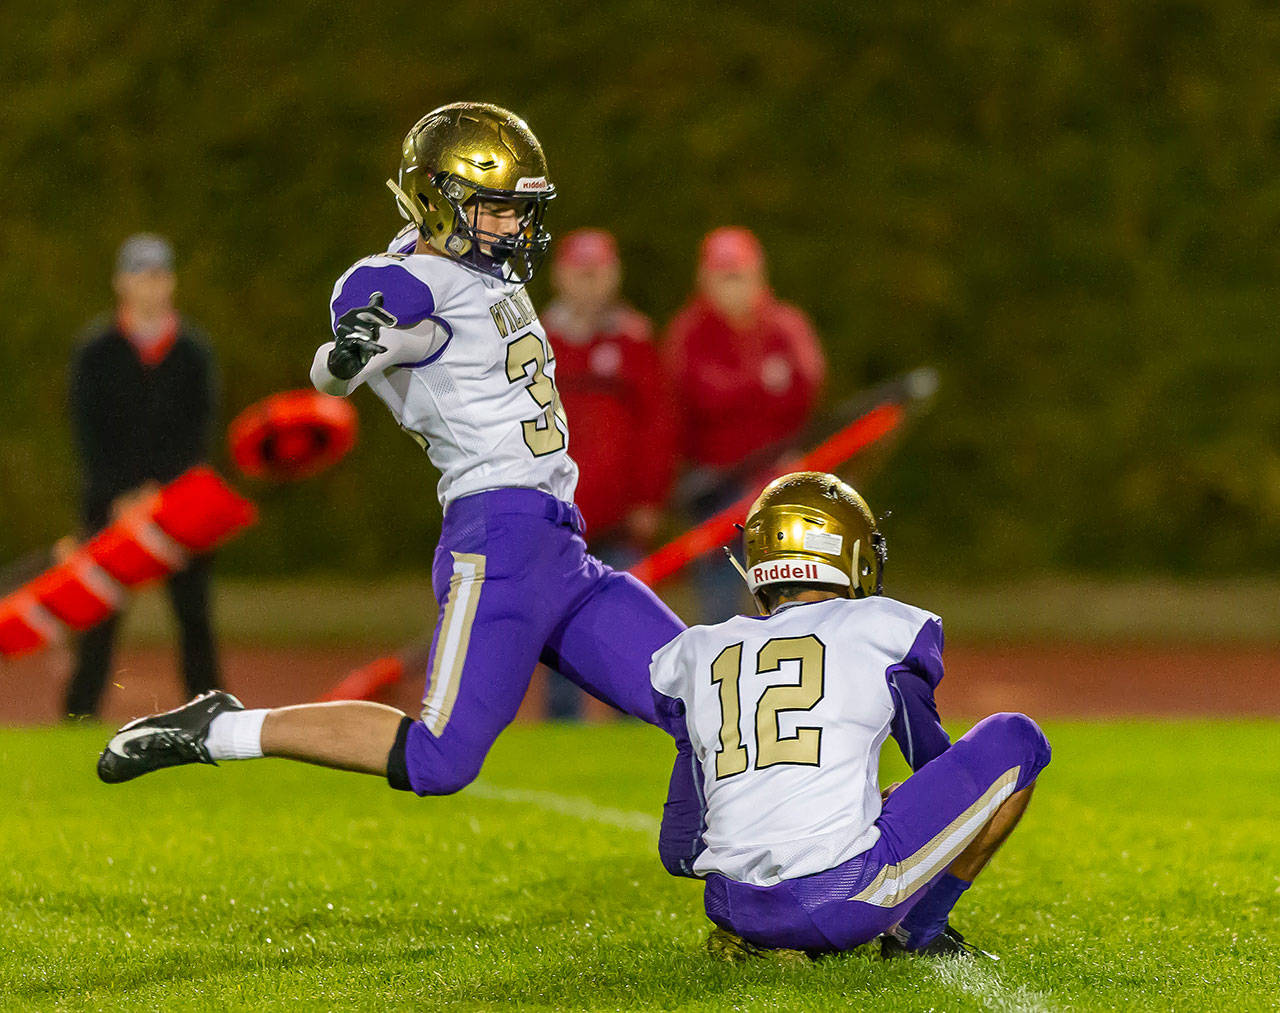 Jake Mitten kicks an extra point out of the hold of Caleb Fitzgerald.(Photo by John Fisken)